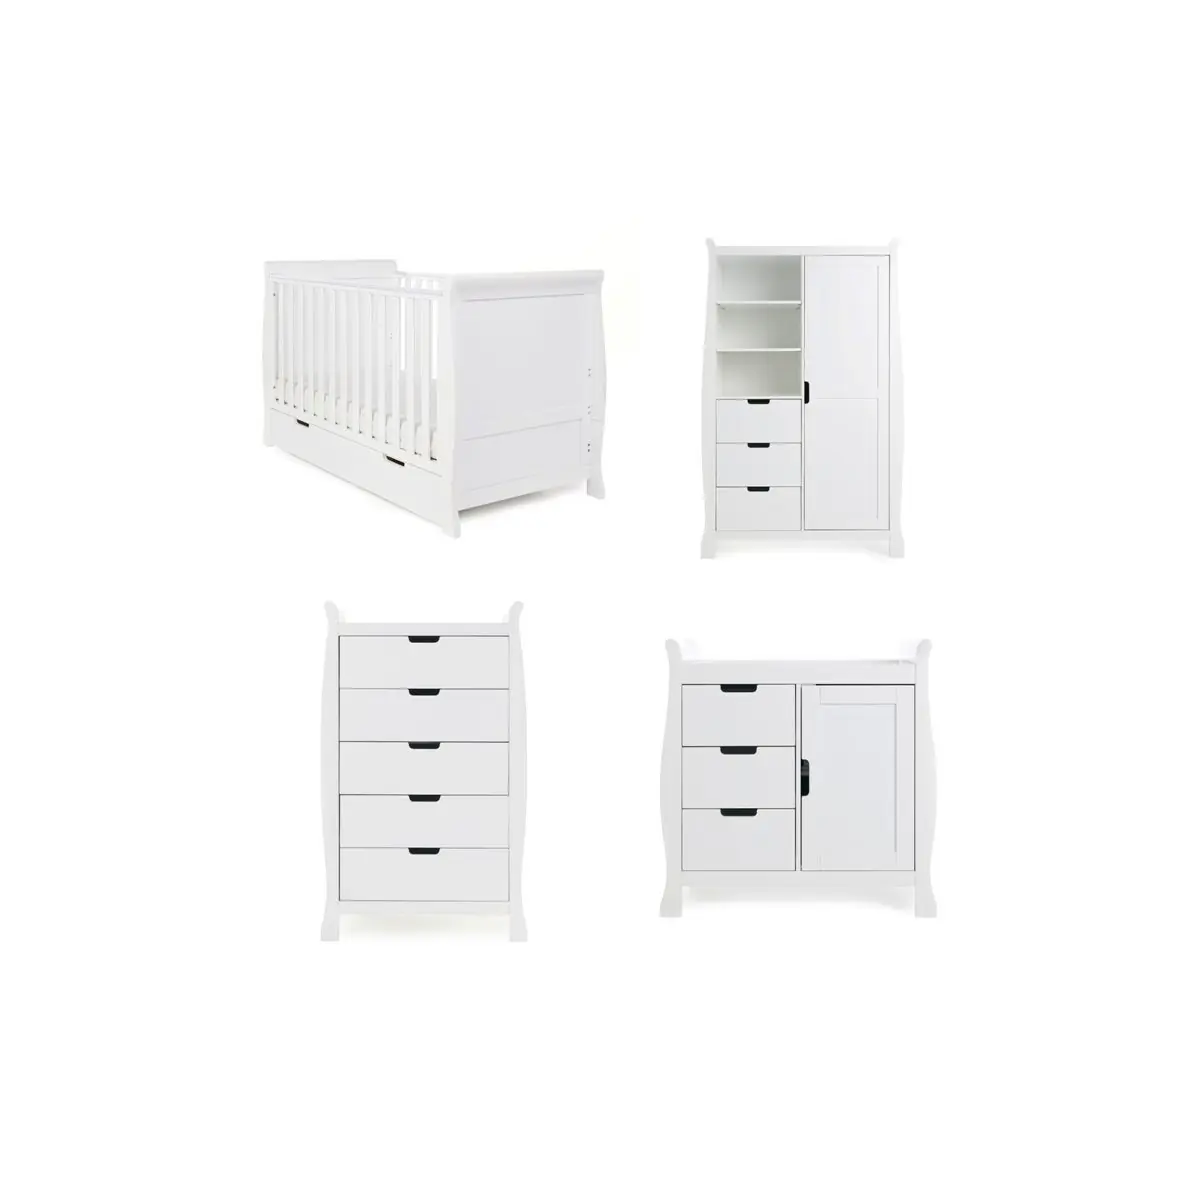 Image of Obaby Stamford Classic Sleigh 4 Piece Furniture Roomset - White